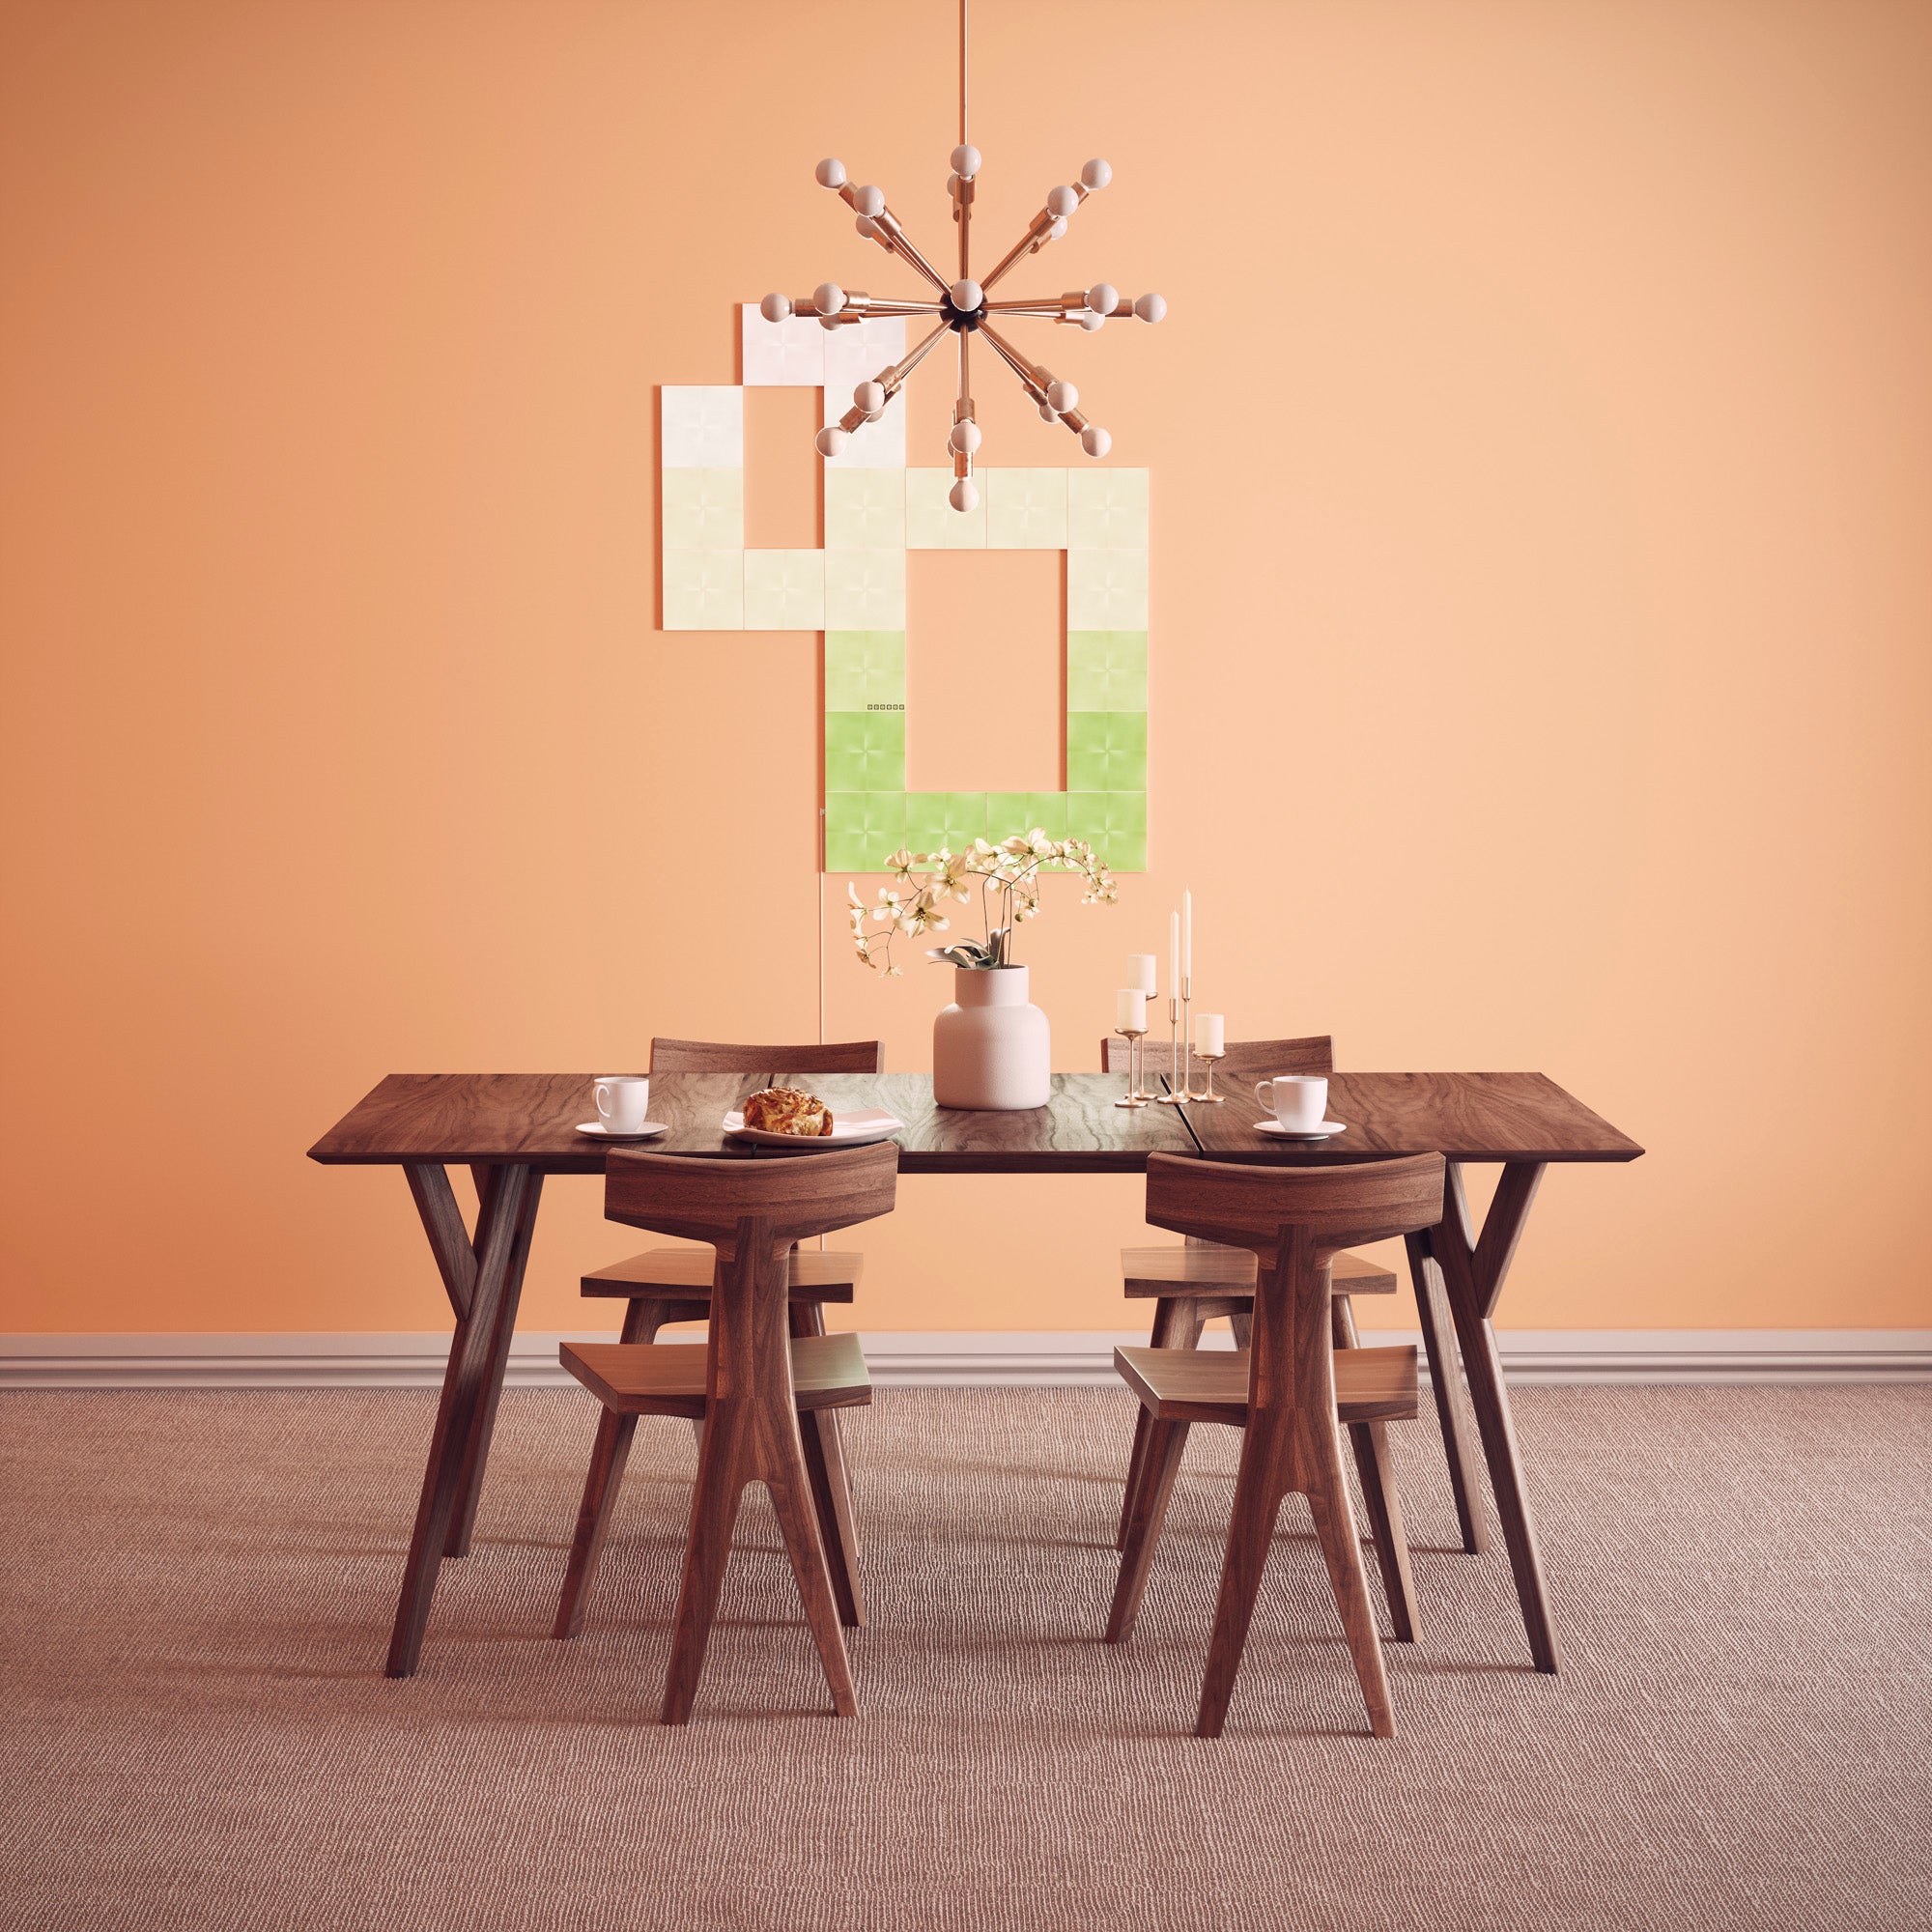 Canvas_21x_Dining_Room_Green_4096x4096_3bc065f8-f113-4cf5-8801-2d6950be9d58